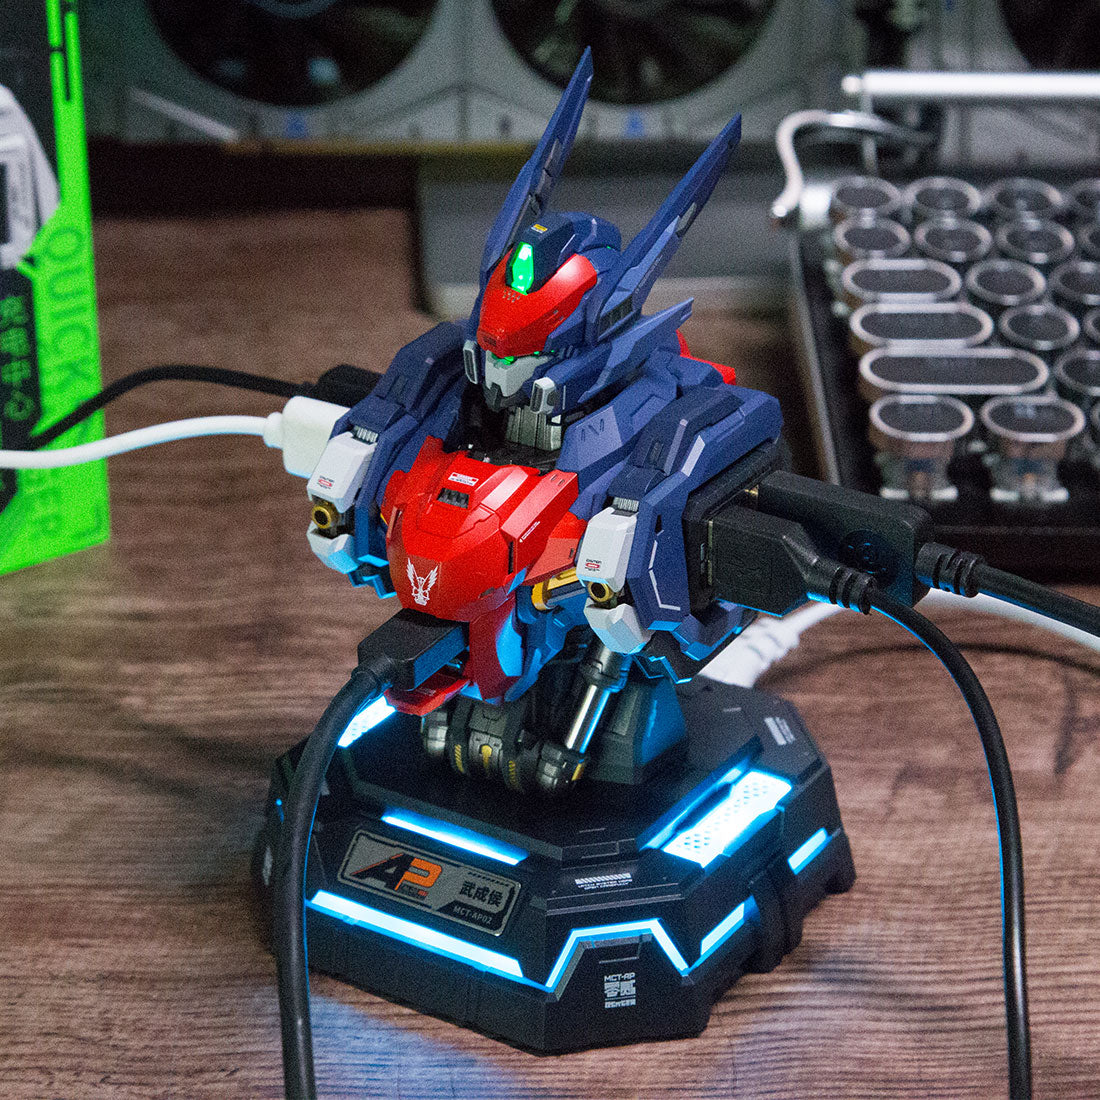 1/72 Scale Mecha Action Figure Charging Station for Multiple Devices - Mechdiy